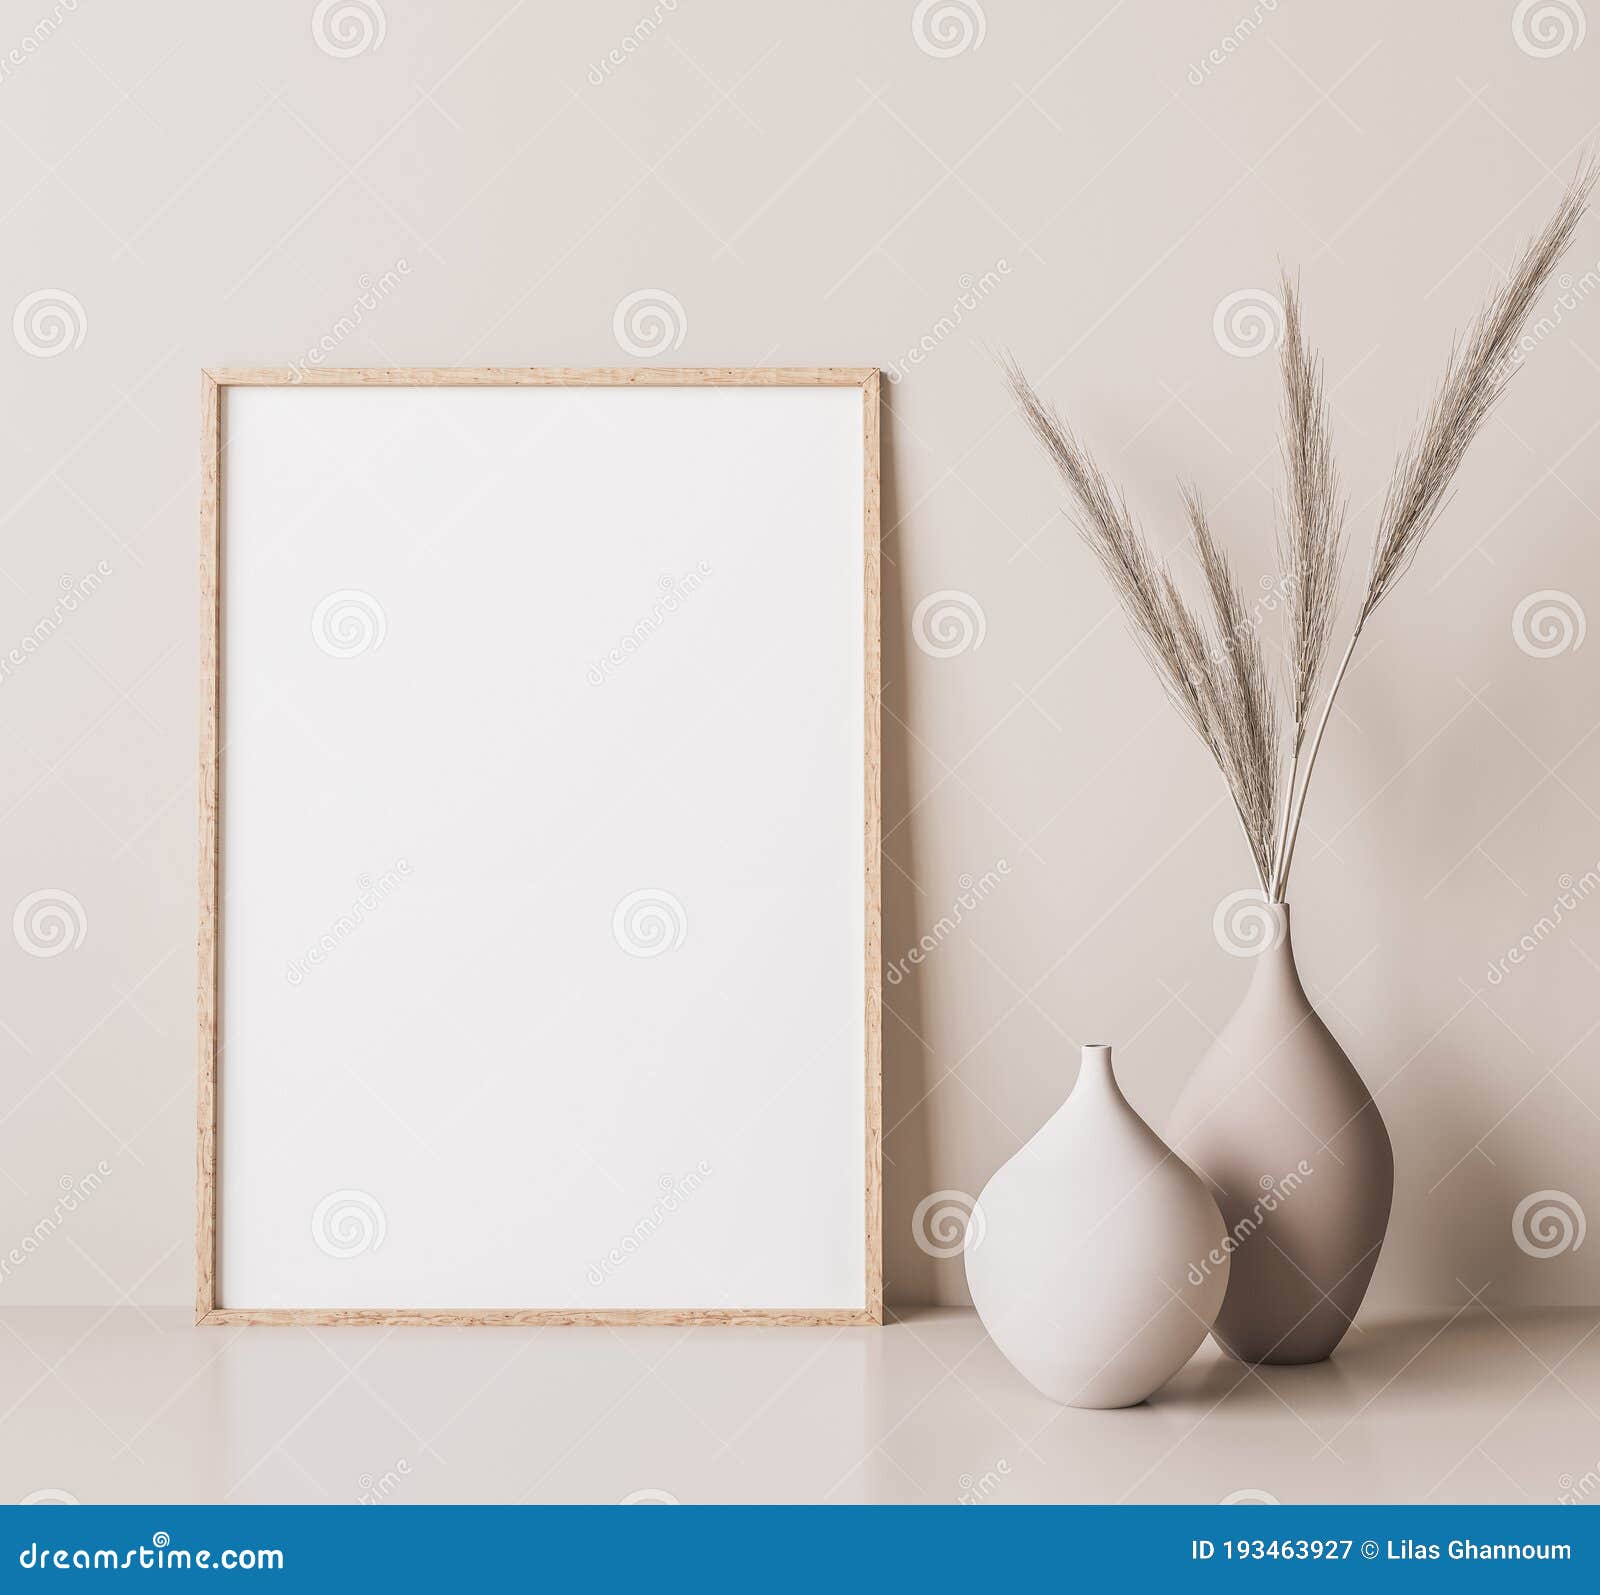 vertical wooden frame mock up. wooden frame poster, and simple vase with pampas on beige wall